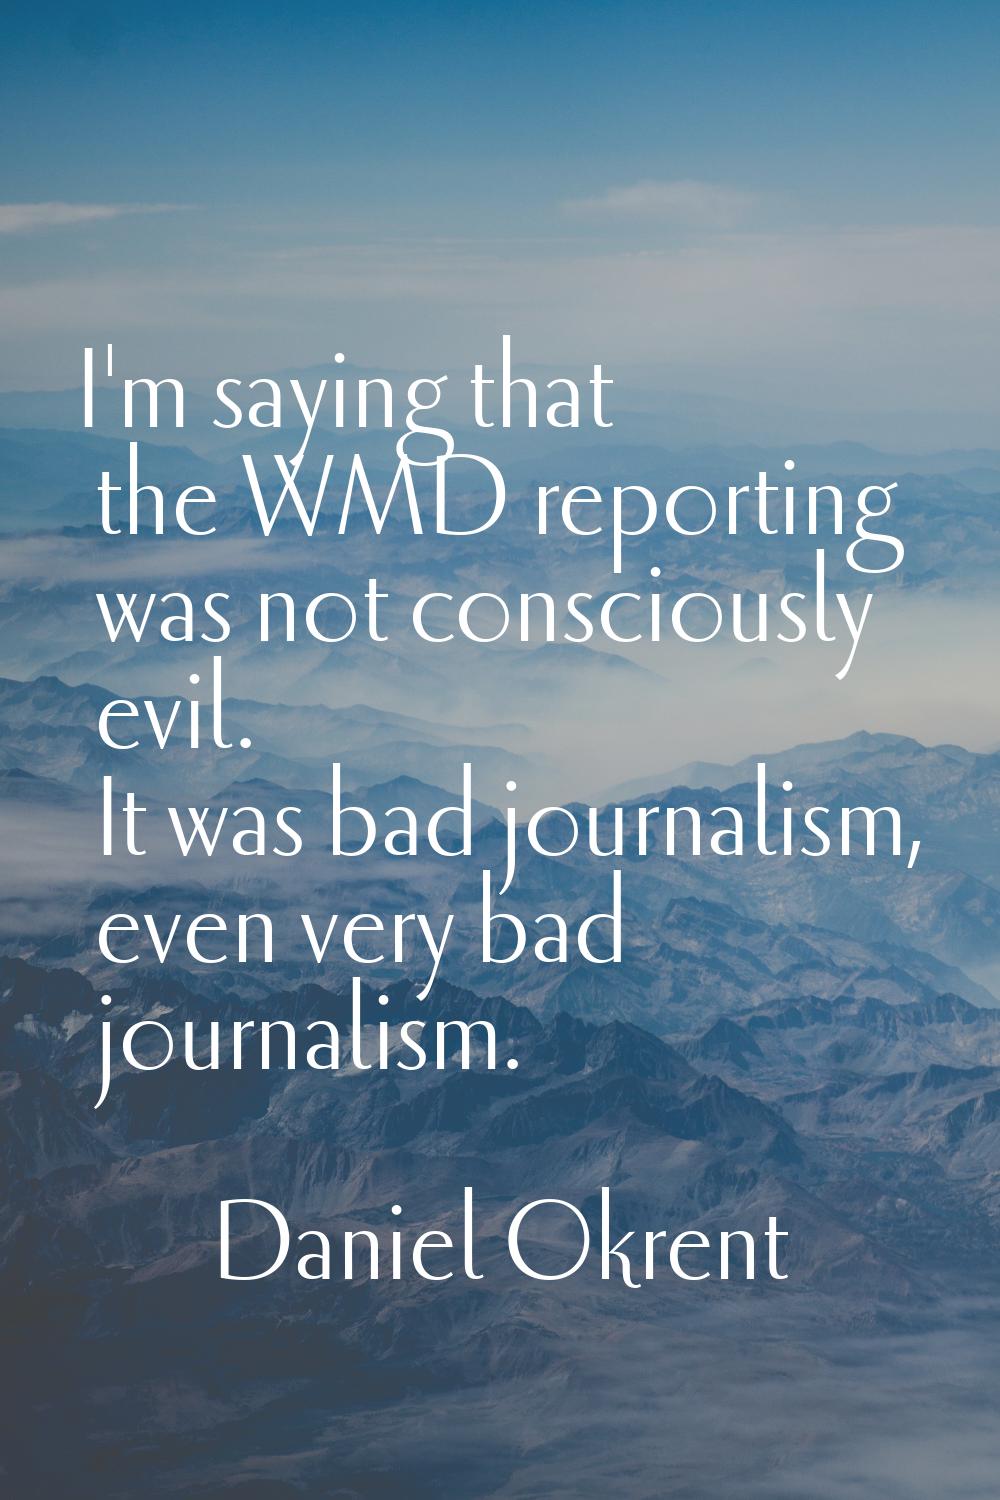 I'm saying that the WMD reporting was not consciously evil. It was bad journalism, even very bad jo